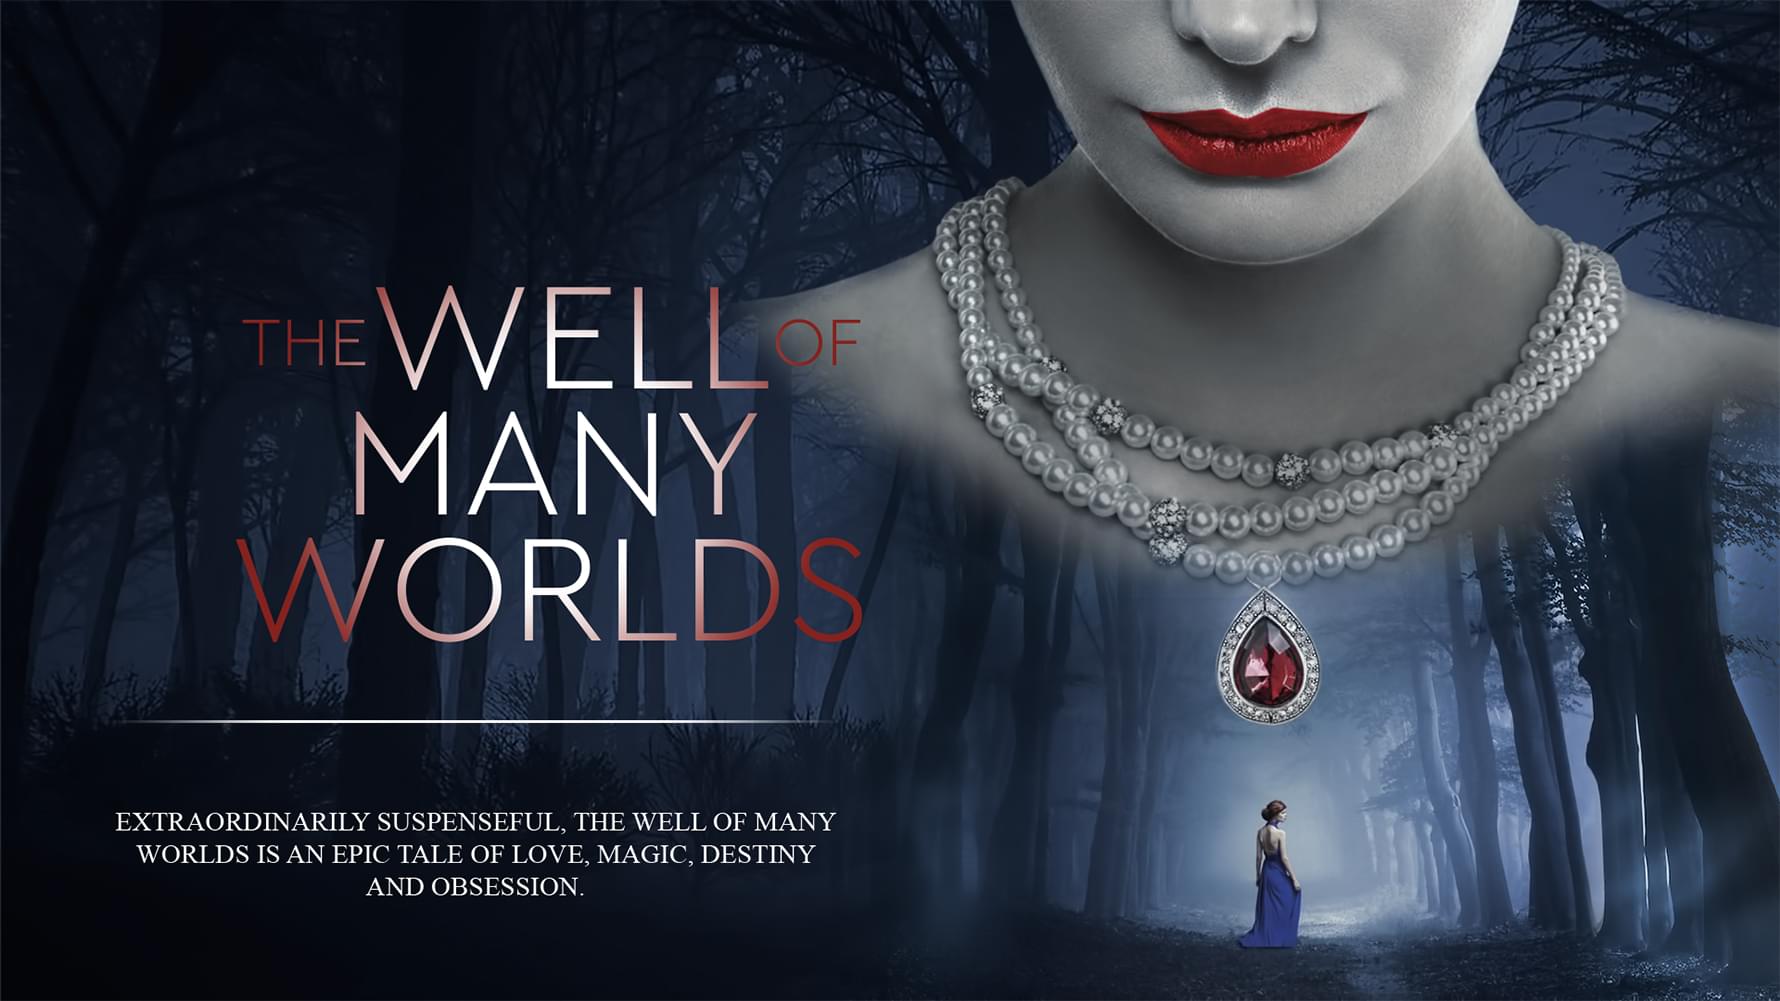 The well of many worlds Digital ADs